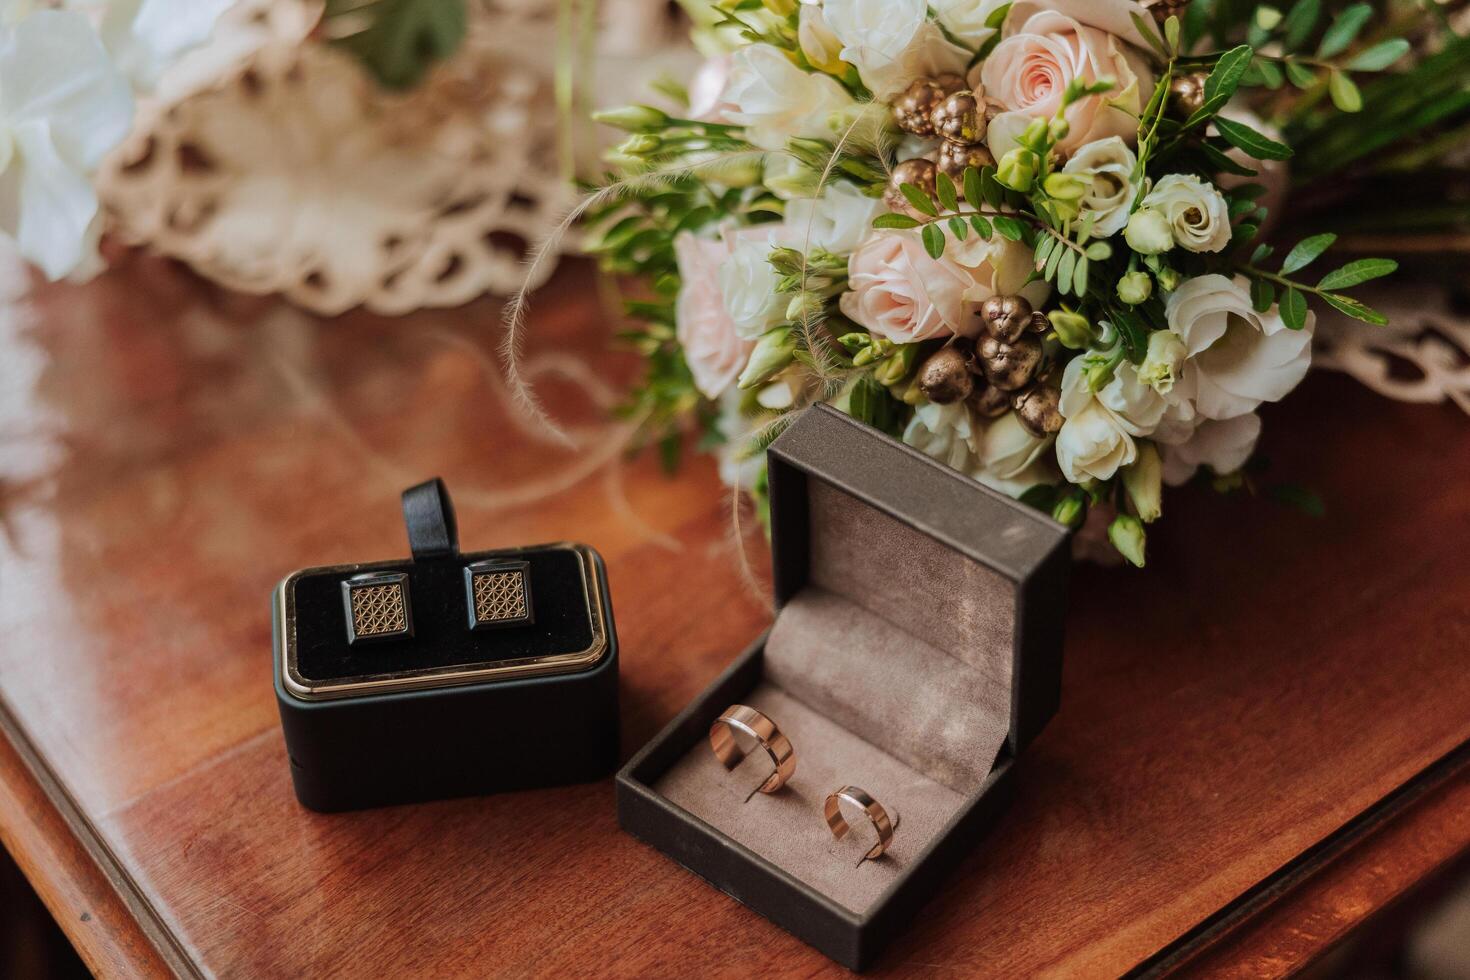 On the floor are men's dark leather shoes and a black belt, a man's suit on a mannequin, a wedding bouquet of flowers, wedding rings, men's perfume. Photo, top view. photo